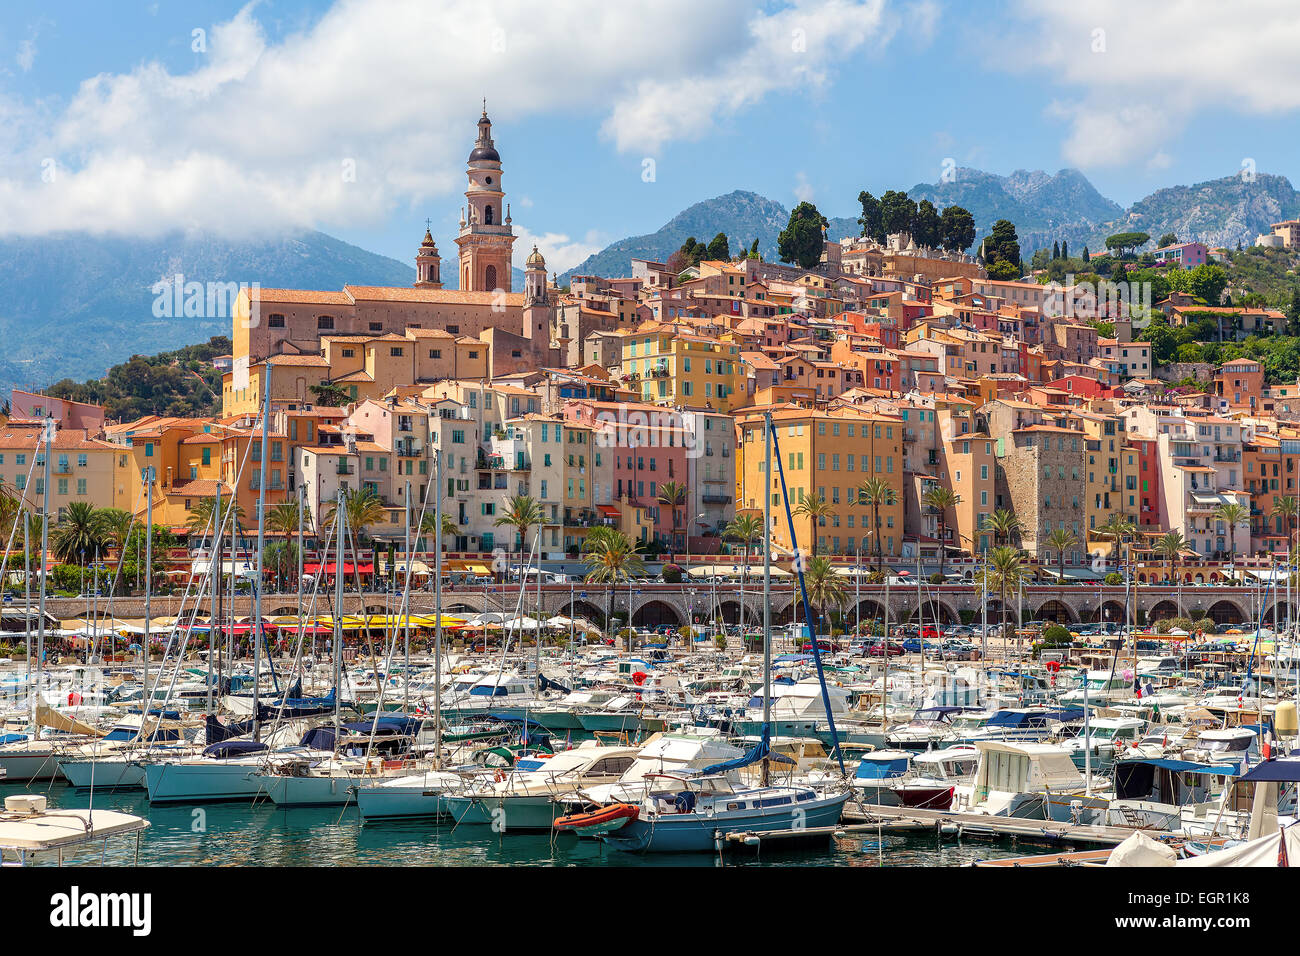 Old colorful houses overlooking small marina with yachts and boats in Menton - town on French Riviera. Stock Photo